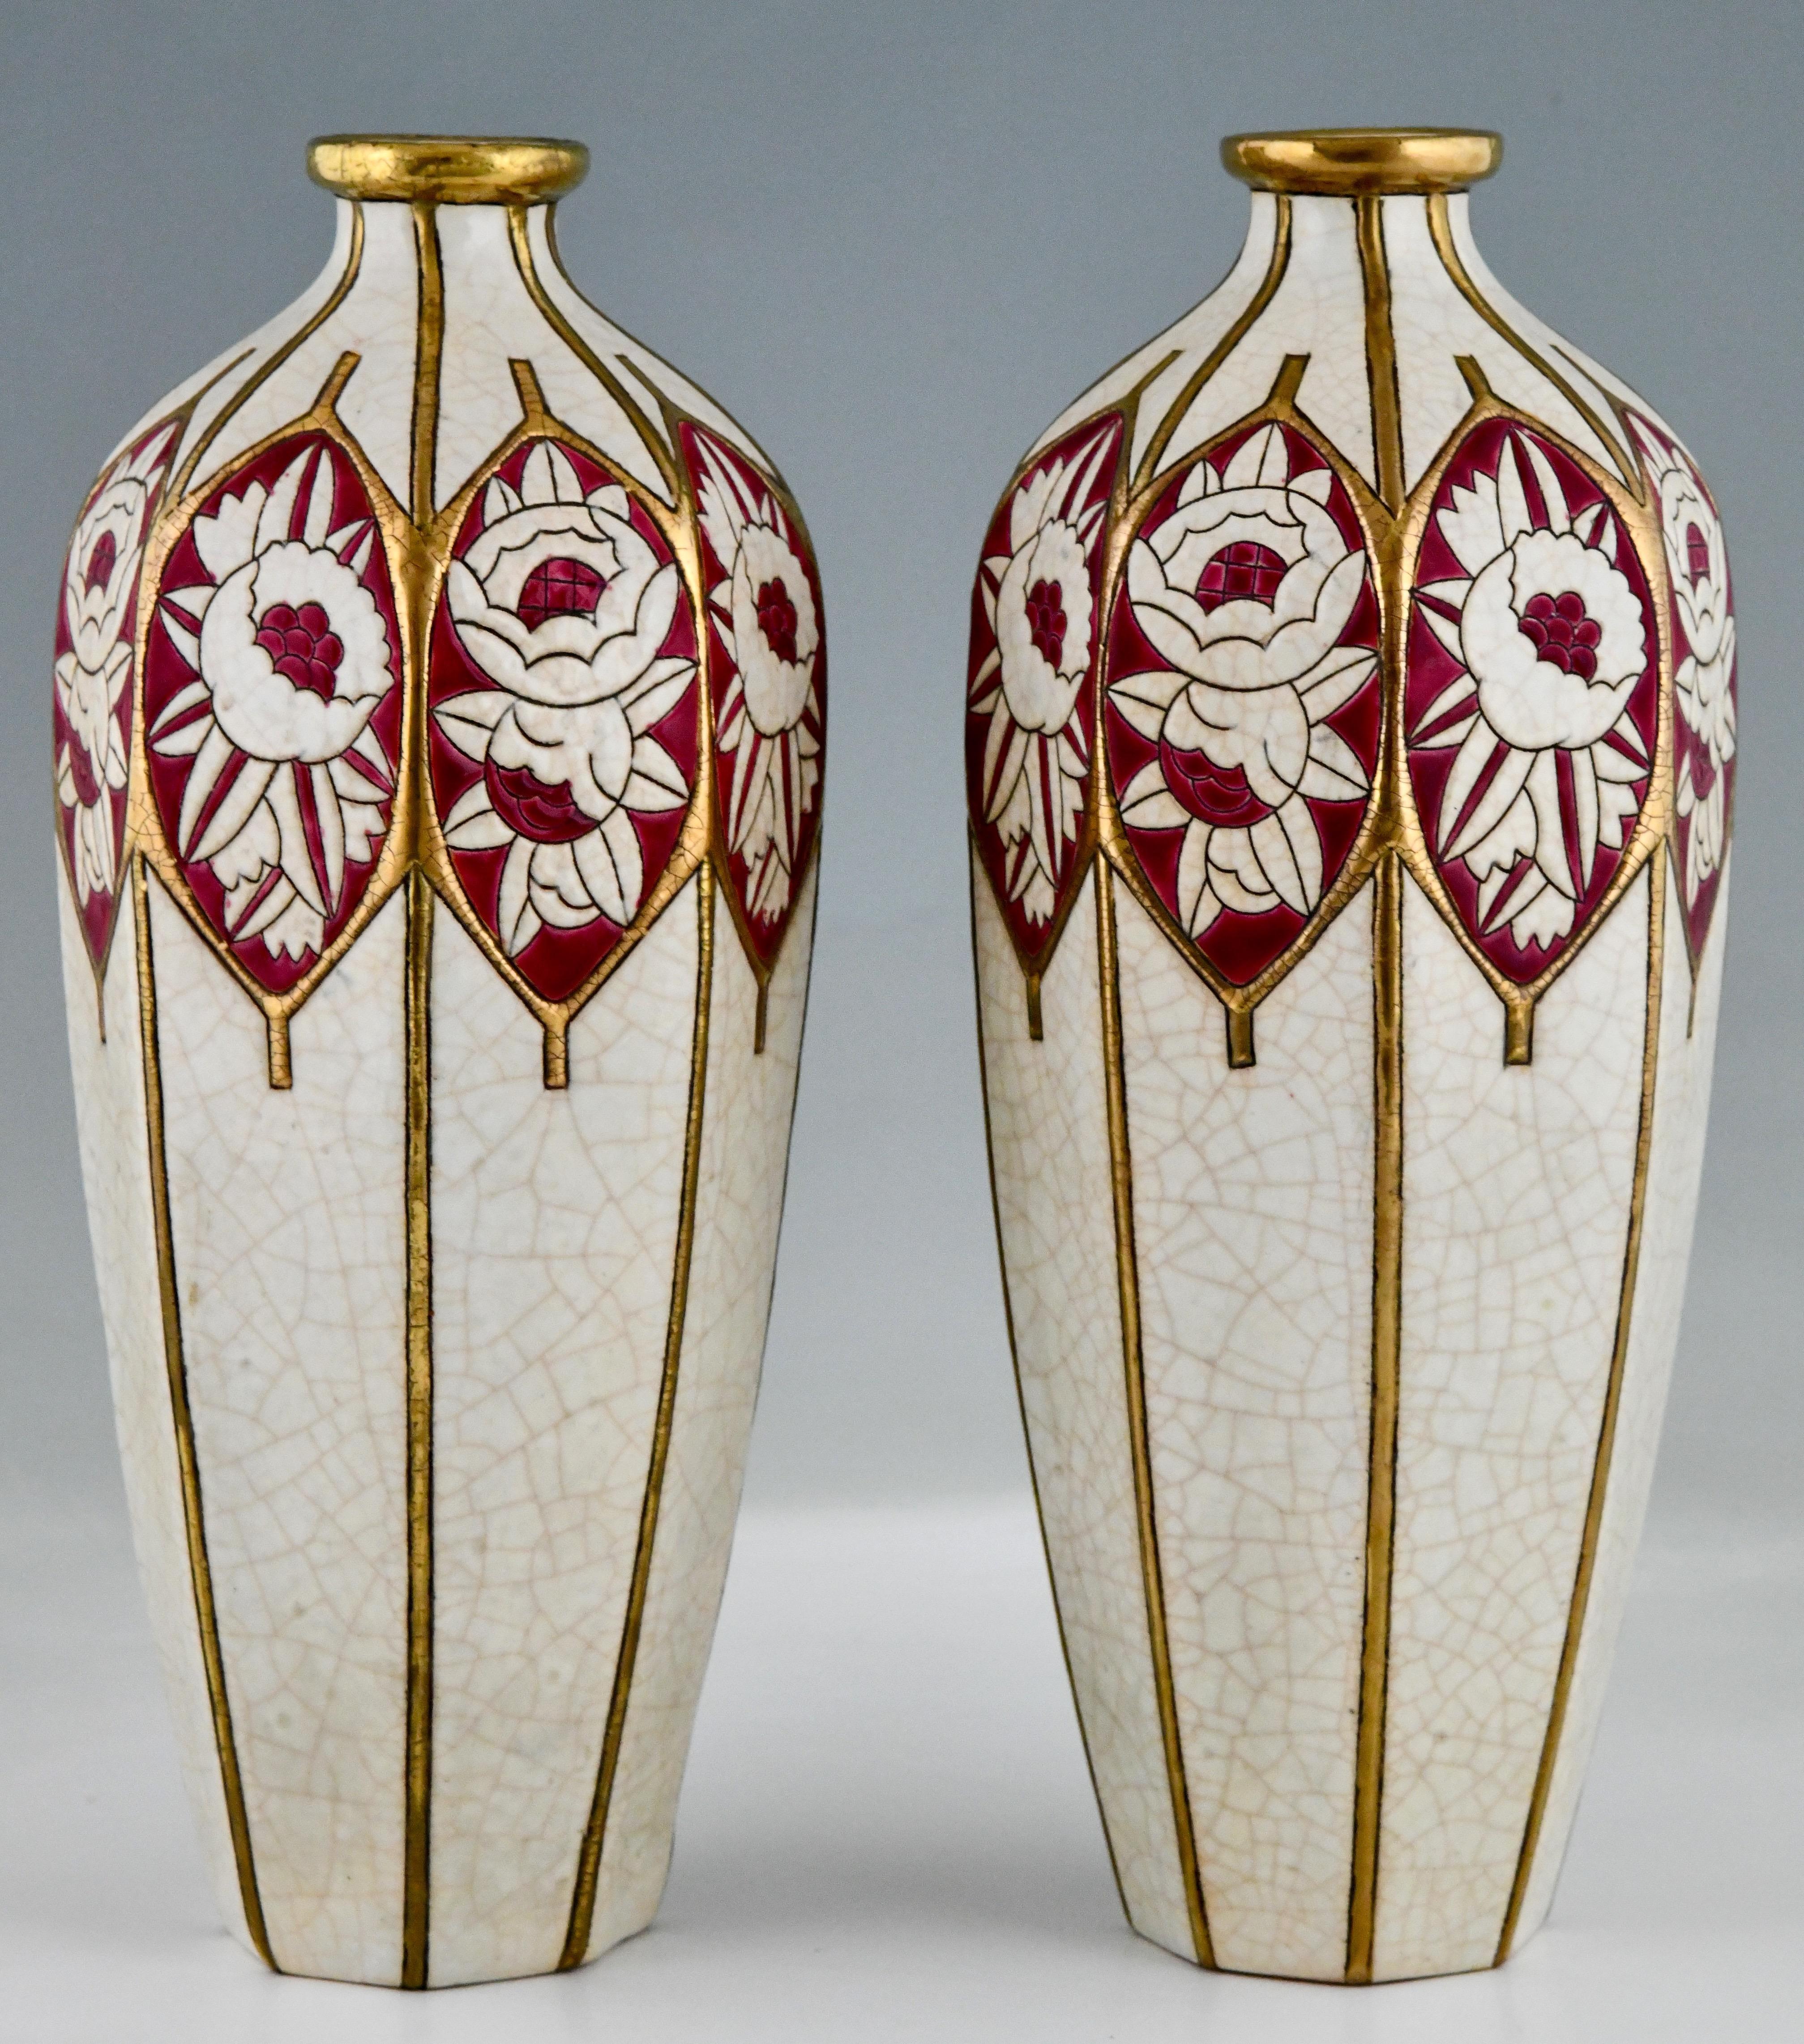 Pair of Art Deco ceramic vases with stylized peonies and rozes by Maurice Paul Chevallier for Longwy.
Glazed ceramic, craquelé, ivory, gold and purple. Shape: 3070. 
France 1925.

This model is illustrated in:
Catalogue Extraordinaire of 2003,